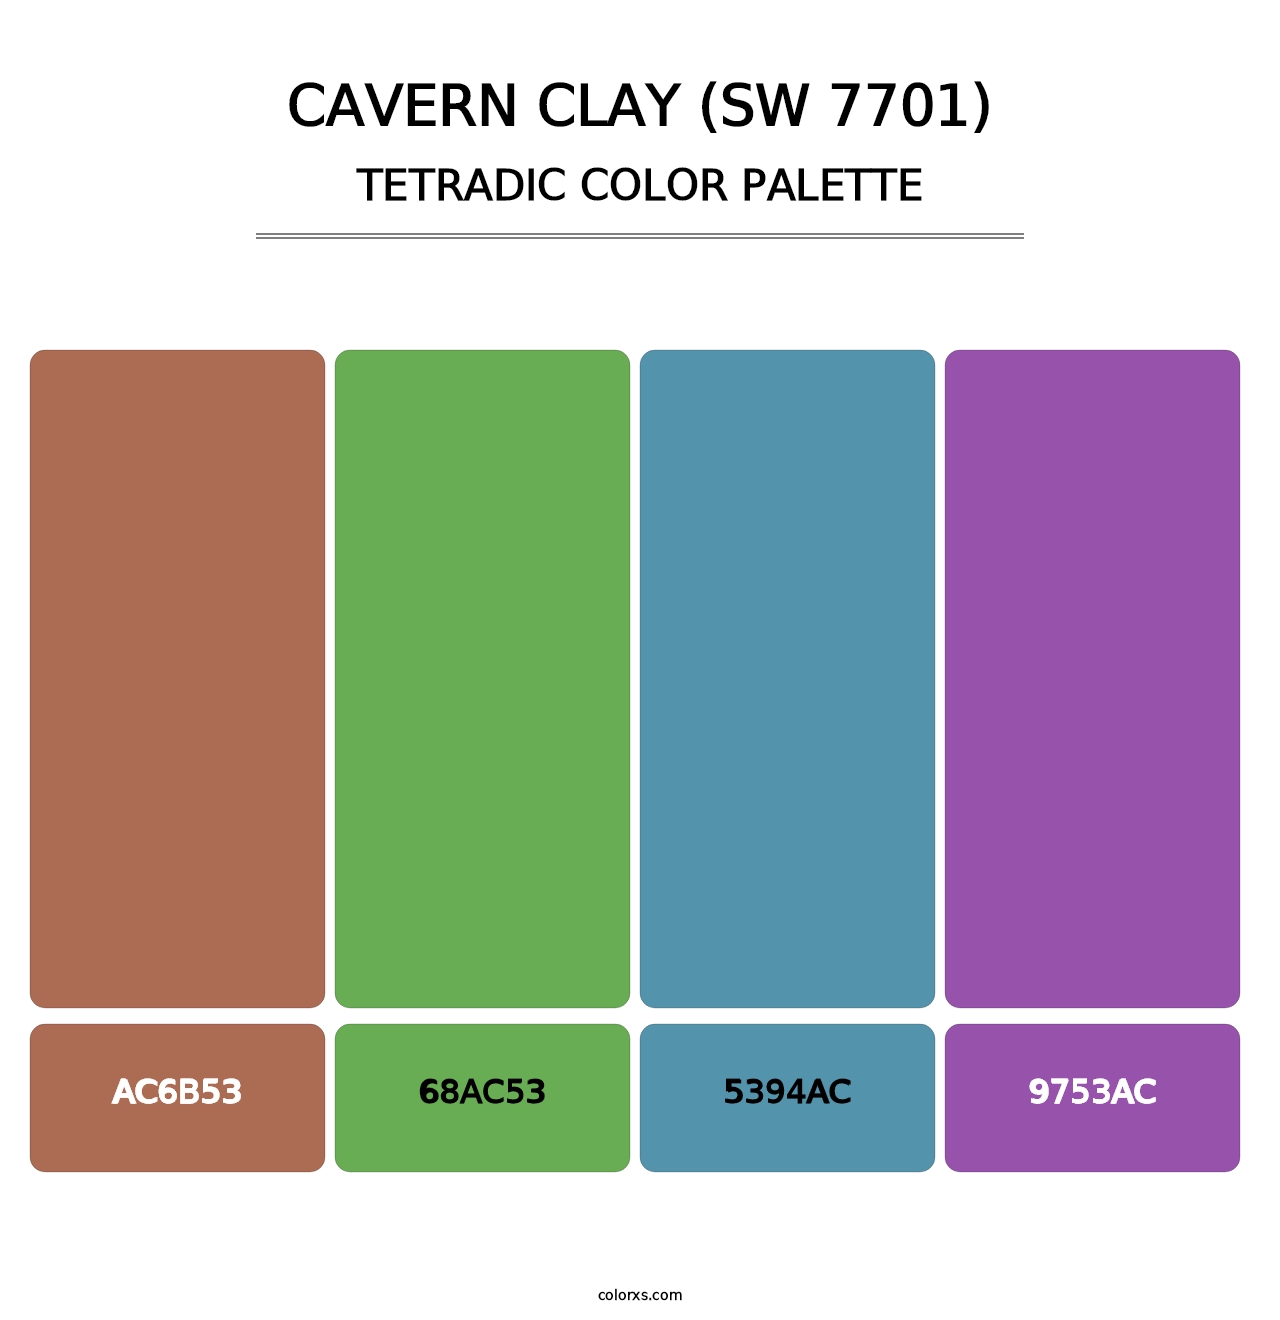 Cavern Clay (SW 7701) - Tetradic Color Palette